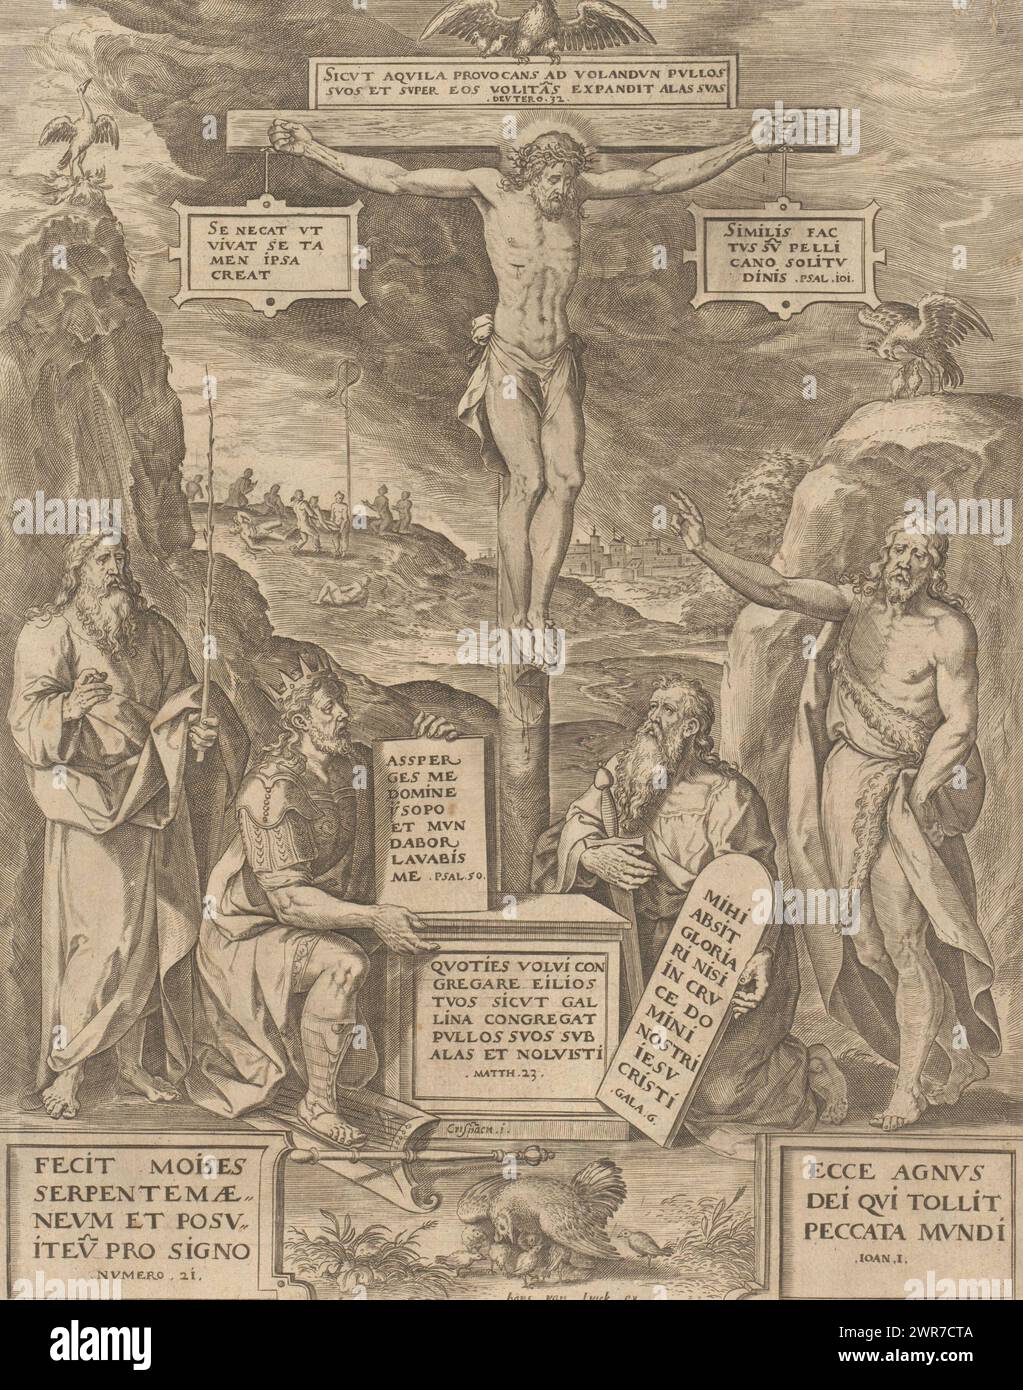 Allegory of the resurrection of Christ, Christ hangs on the cross. At the foot of the cross Moses and King David (left) and Paul and John the Baptist (right). Various references to the resurrection of Christ all around: above the cross and on the right an eagle, at the bottom a chicken with her chicks, and on the left a phoenix. In the background the creation of the copper serpent by Moses. Left and bottom right Bible quotes from Num. 21 and John 1 in Latin., print maker: Hieronymus Wierix, after design by: Chrispijn van den Broeck, publisher : Hans van Luyck, Antwerp, 1565 - c. 1586 Stock Photo